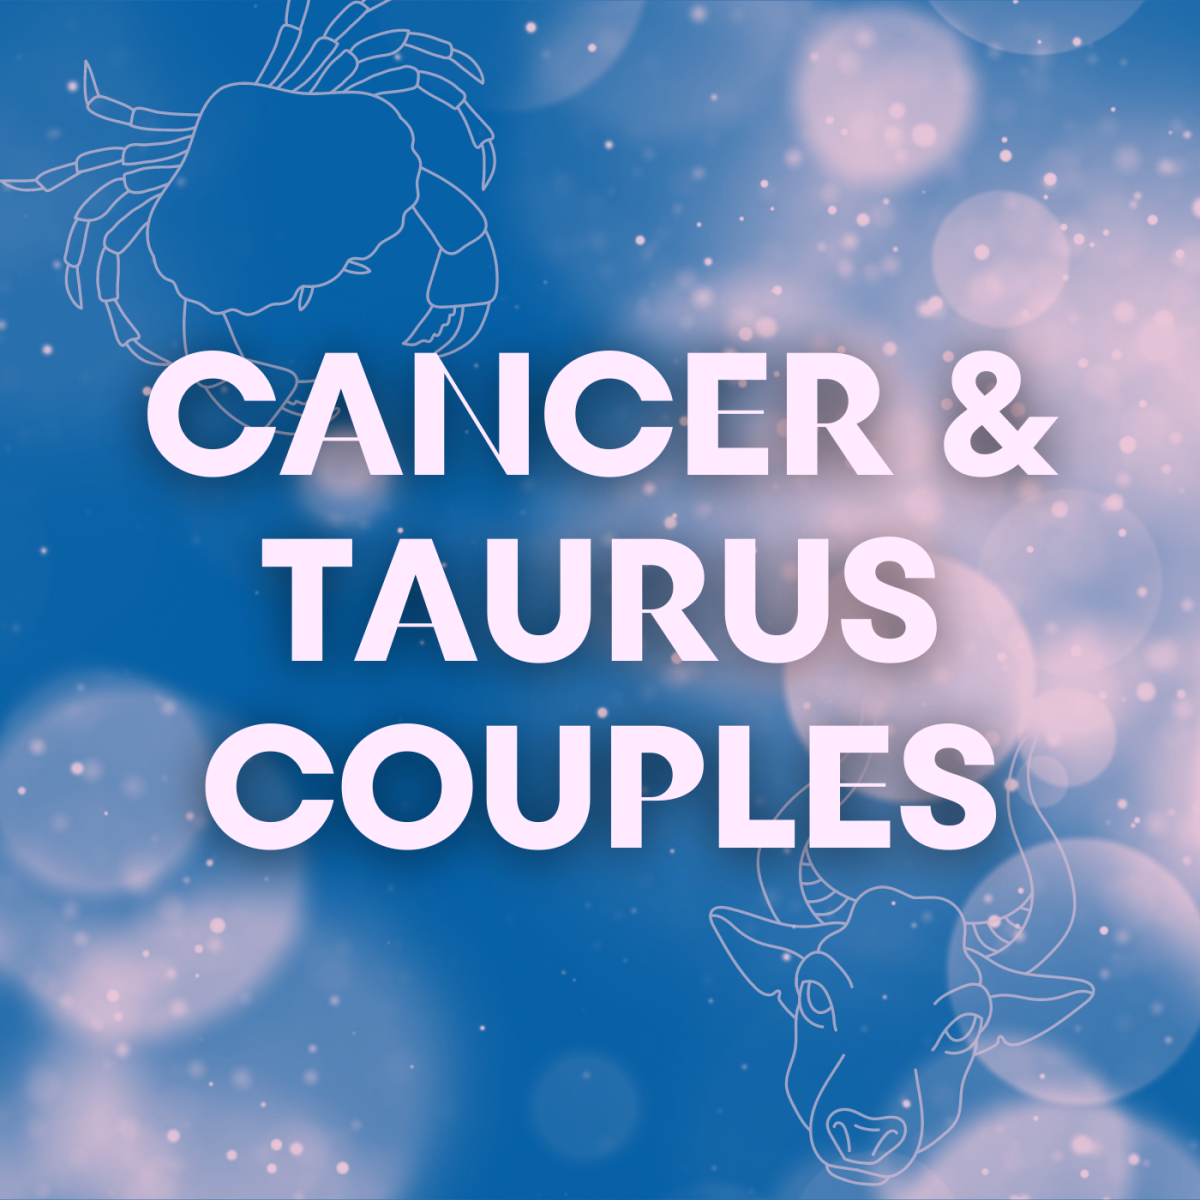 Cancer and Taurus can be wonderfully compatible. Learn more about the crab and the bull in a relationship.